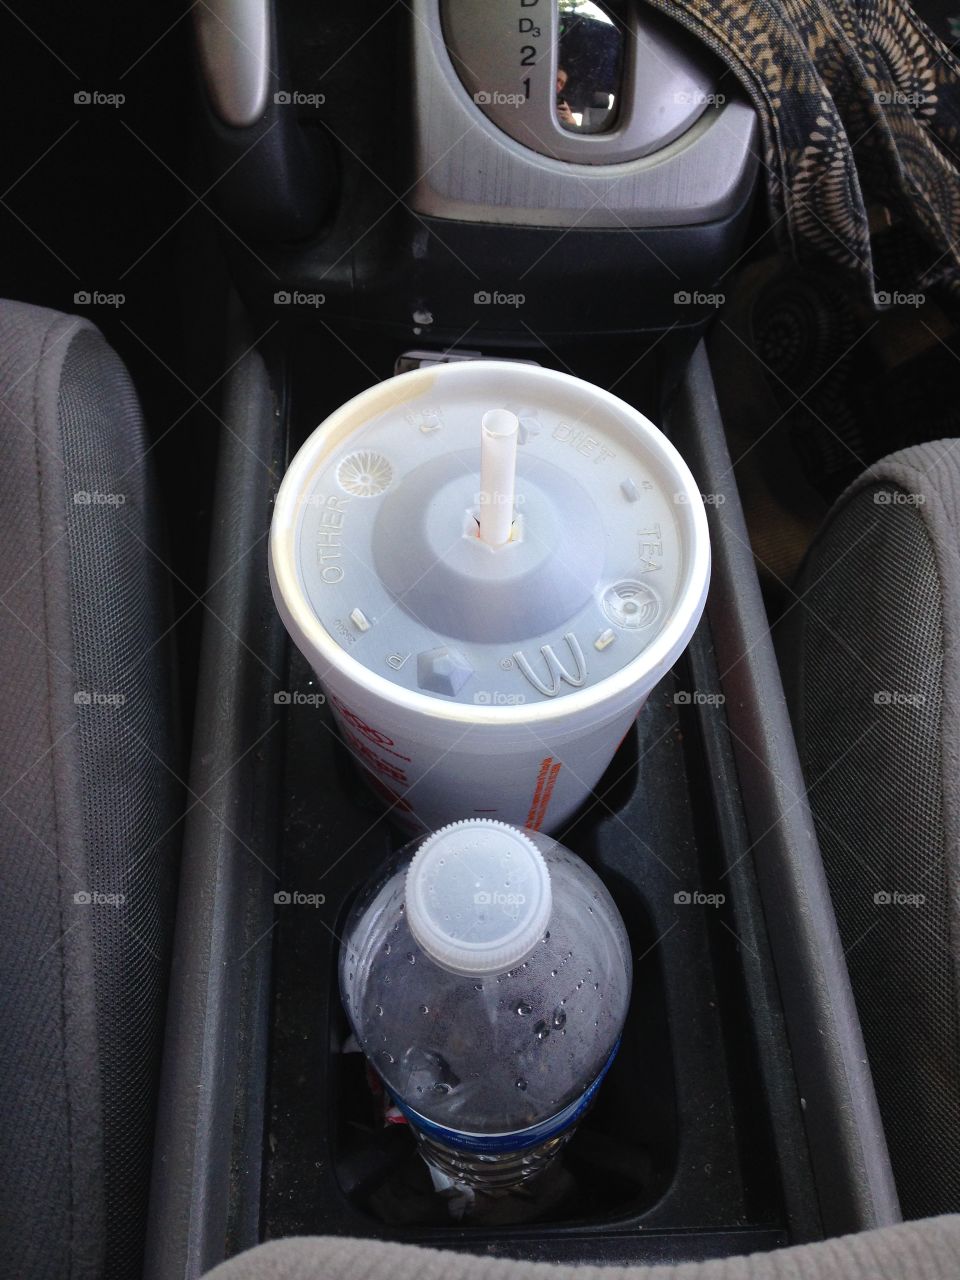 Drinks in the cup holders between the two front car seats.